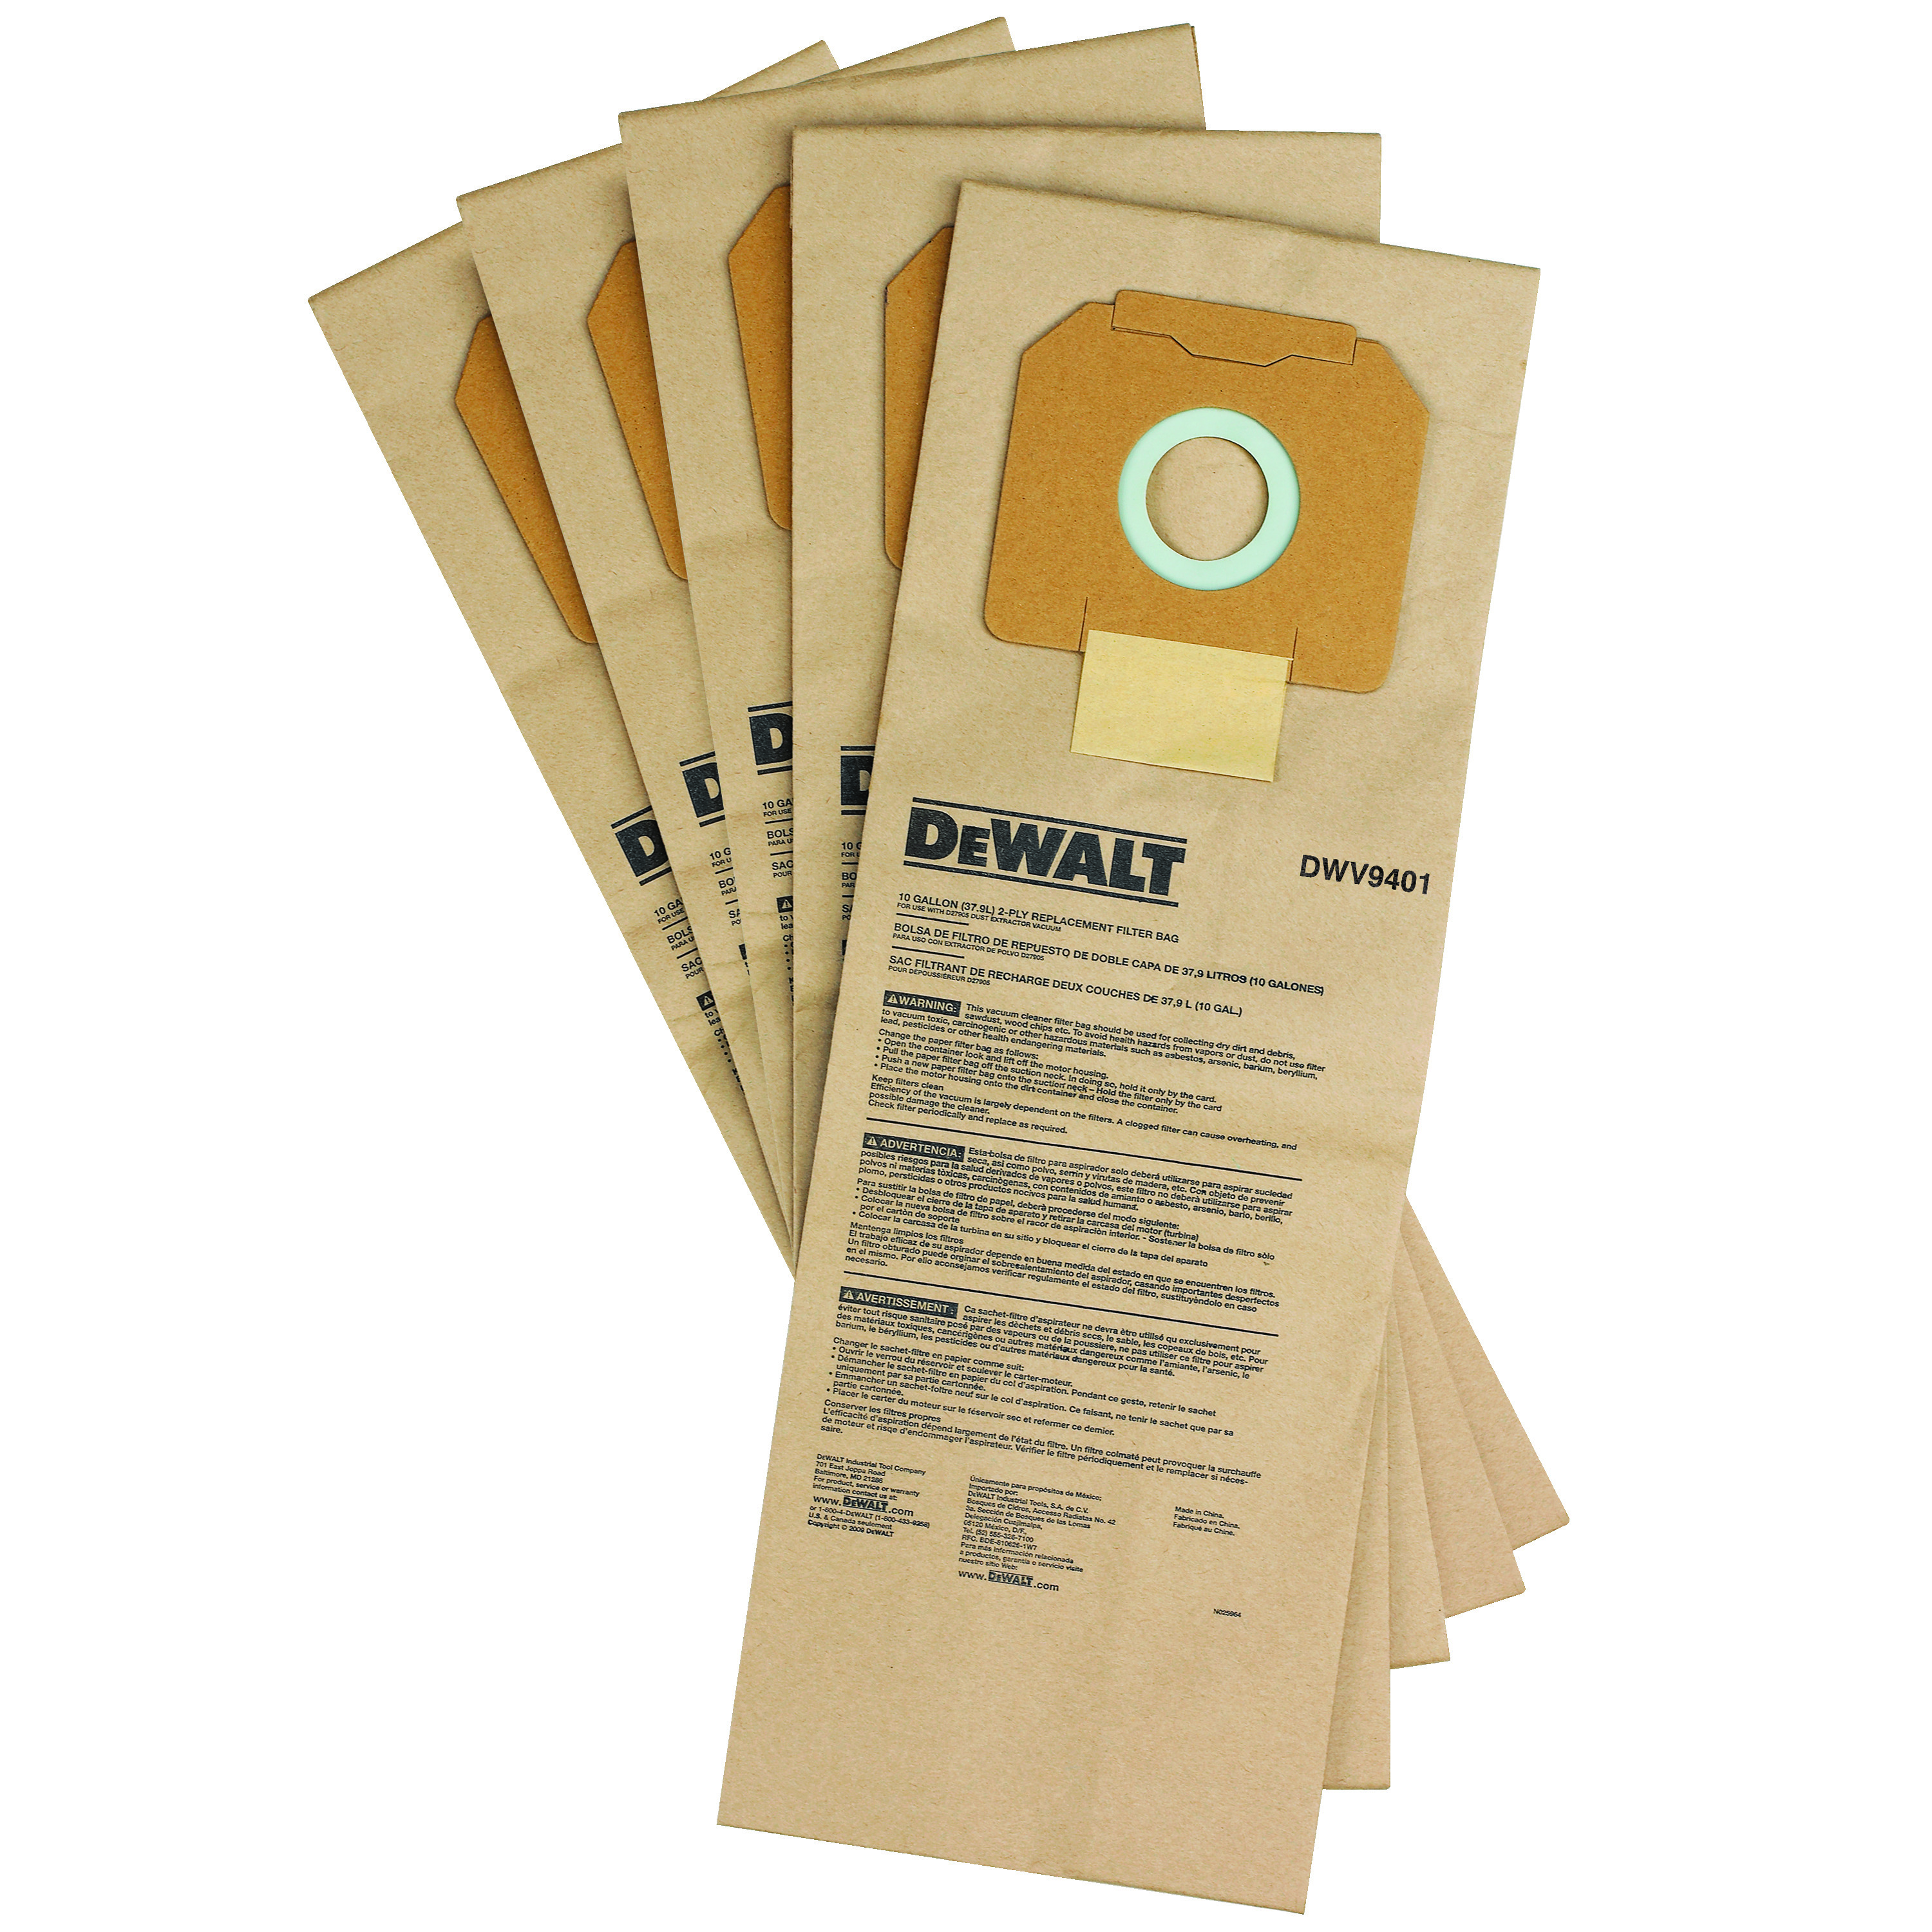 DeWALT® DWV9401 Non-Reusable Paper Bag, 1-7/8 in H x 8-1/2 in W x 3-1/2 in D, Paper, For Use With DWV012 Type 1 Dust Extractor